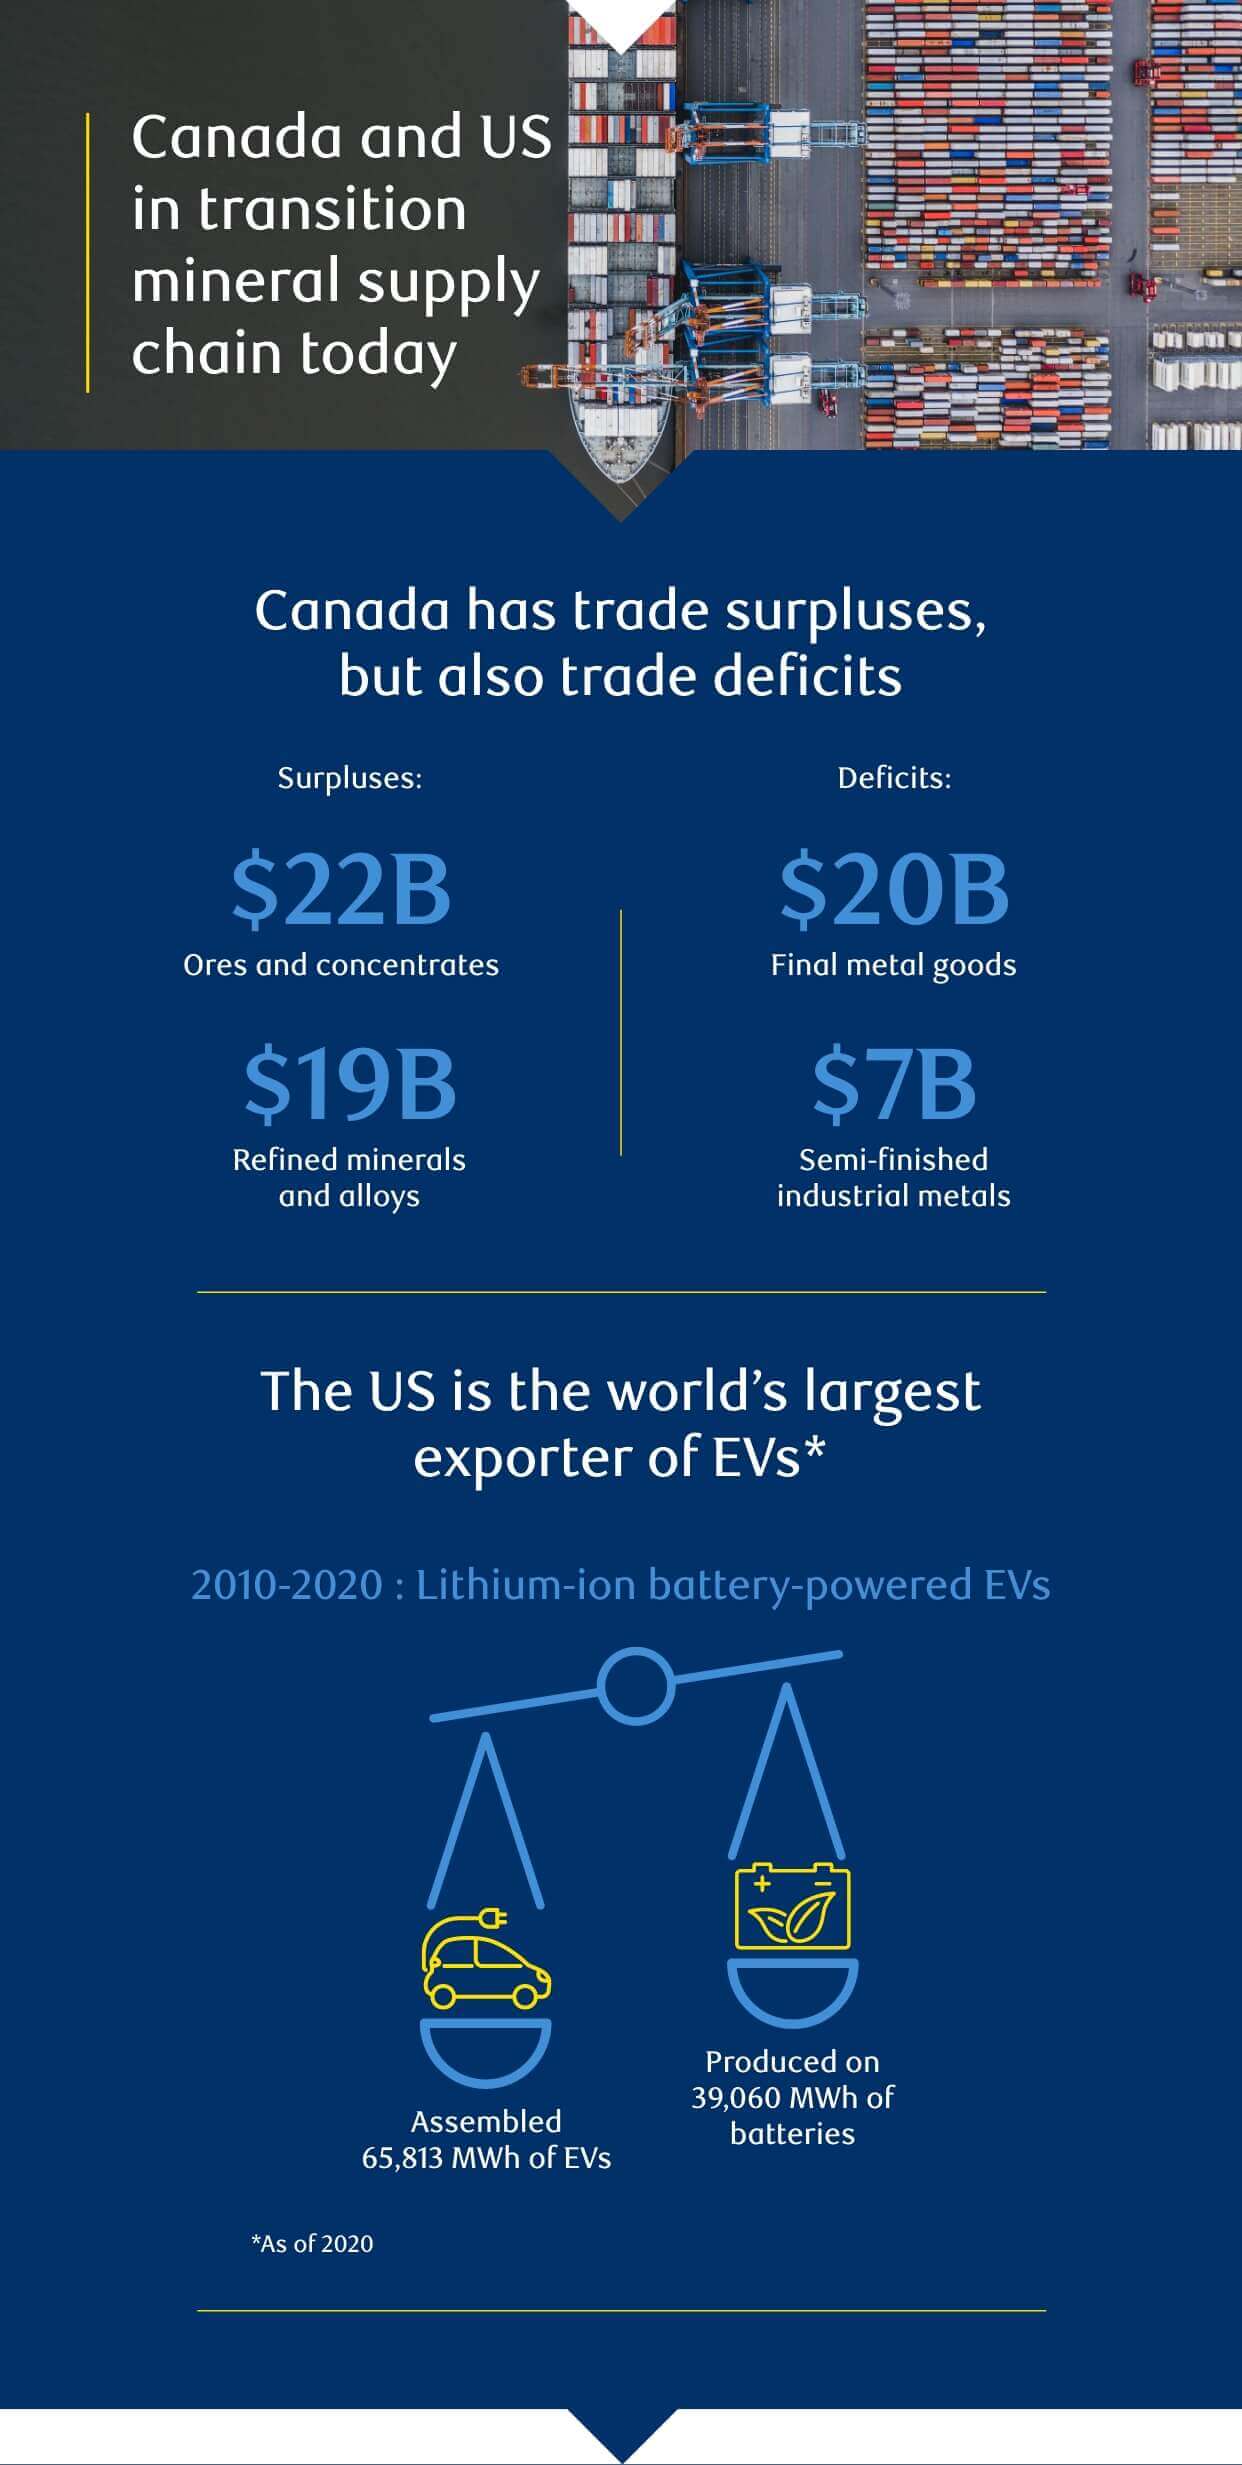 Canada and US in transition mineral supply chain today - infographic